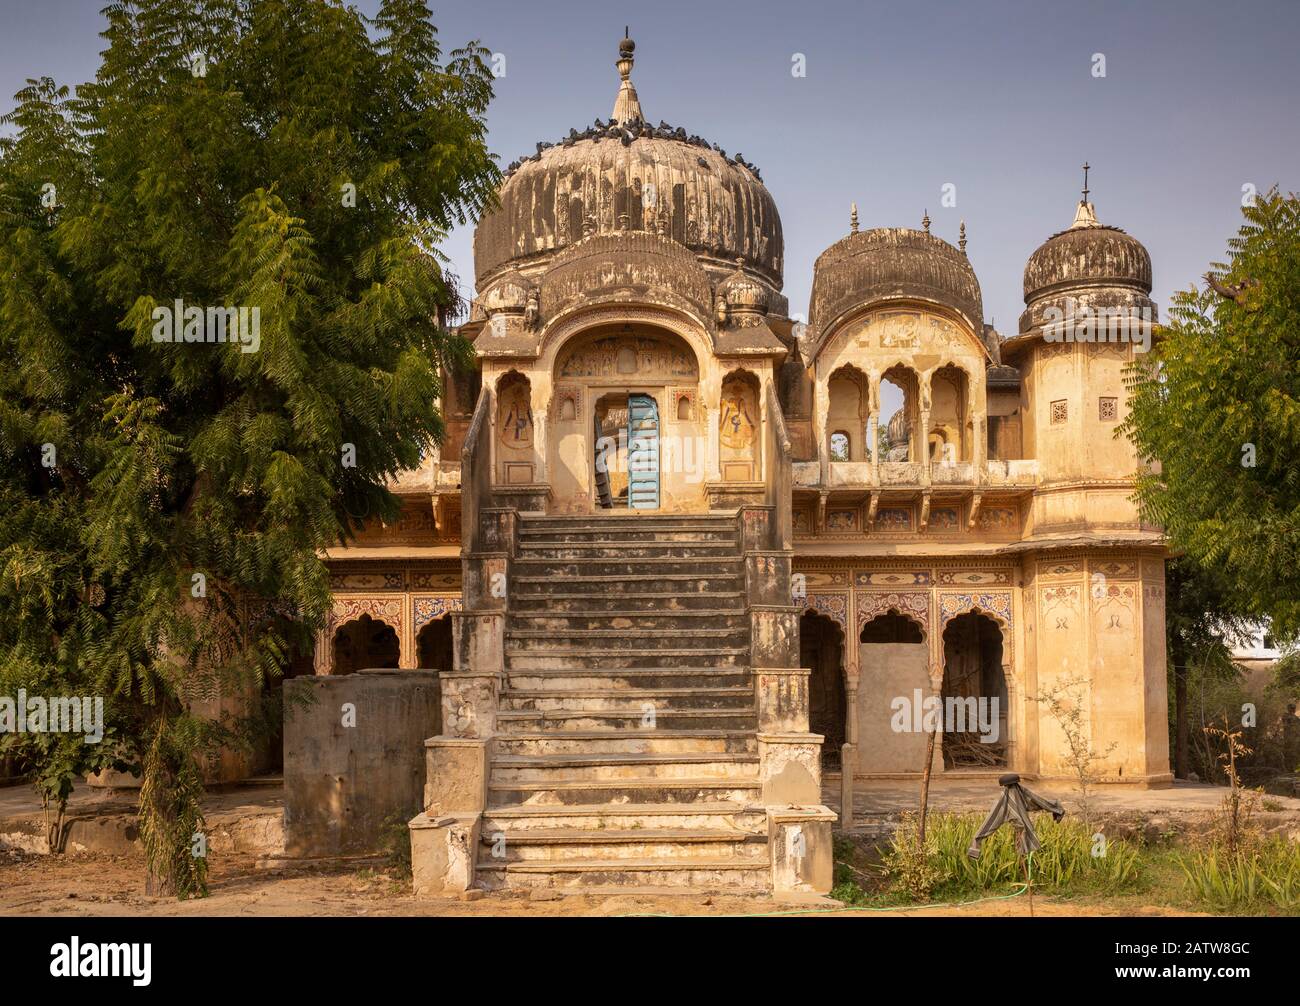 India, Rajasthan, Shekhawati, Rambagh, Dharamsala guest house for pilgrims attached to old temple Stock Photo